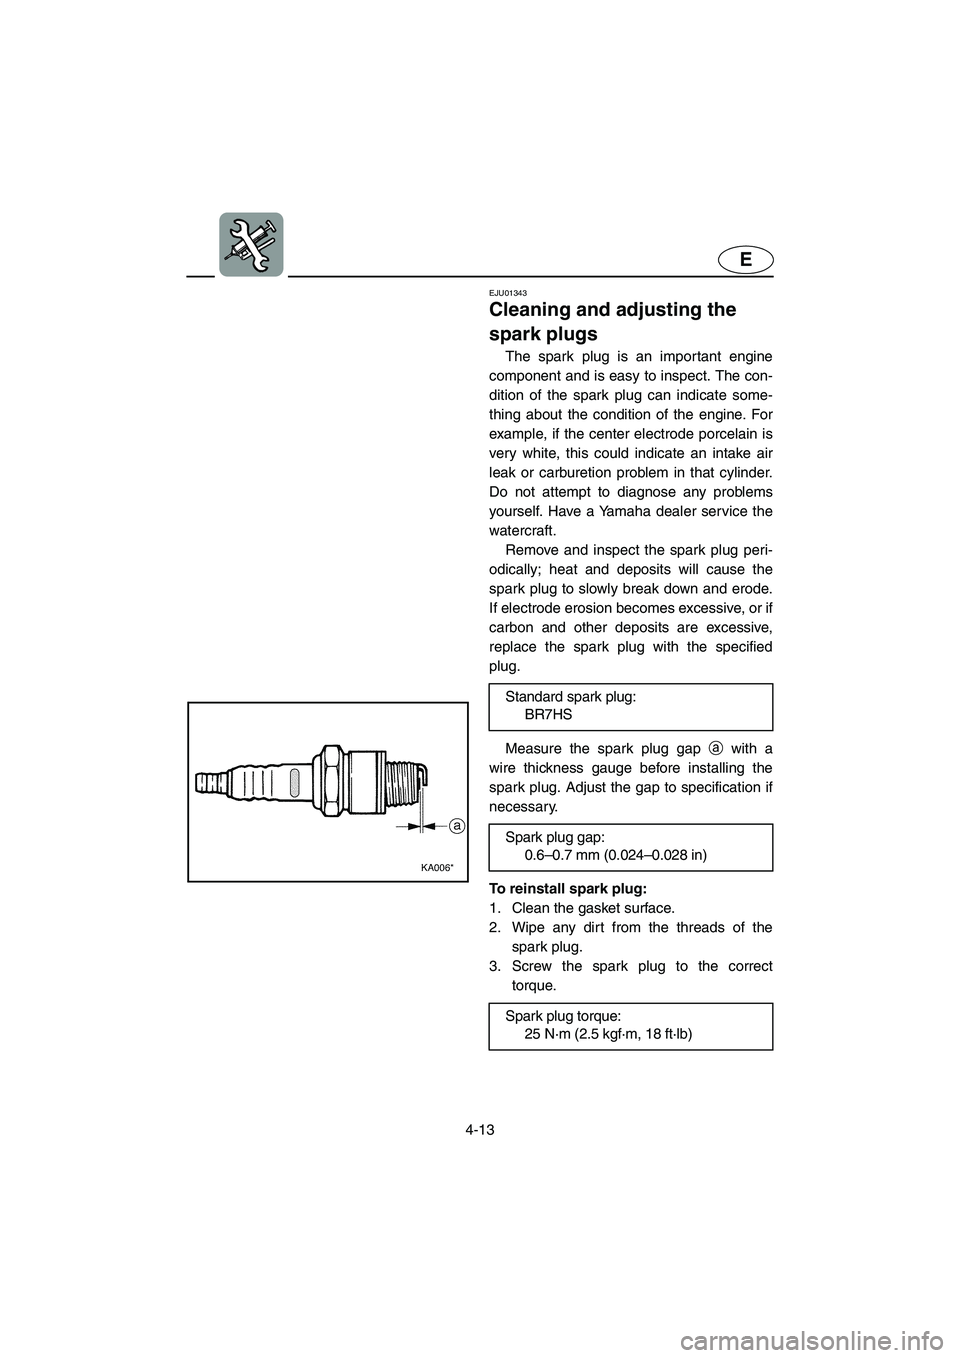 YAMAHA SUPERJET 2002  Owners Manual 4-13
E
EJU01343 
Cleaning and adjusting the 
spark plugs  
The spark plug is an important engine
component and is easy to inspect. The con-
dition of the spark plug can indicate some-
thing about the 